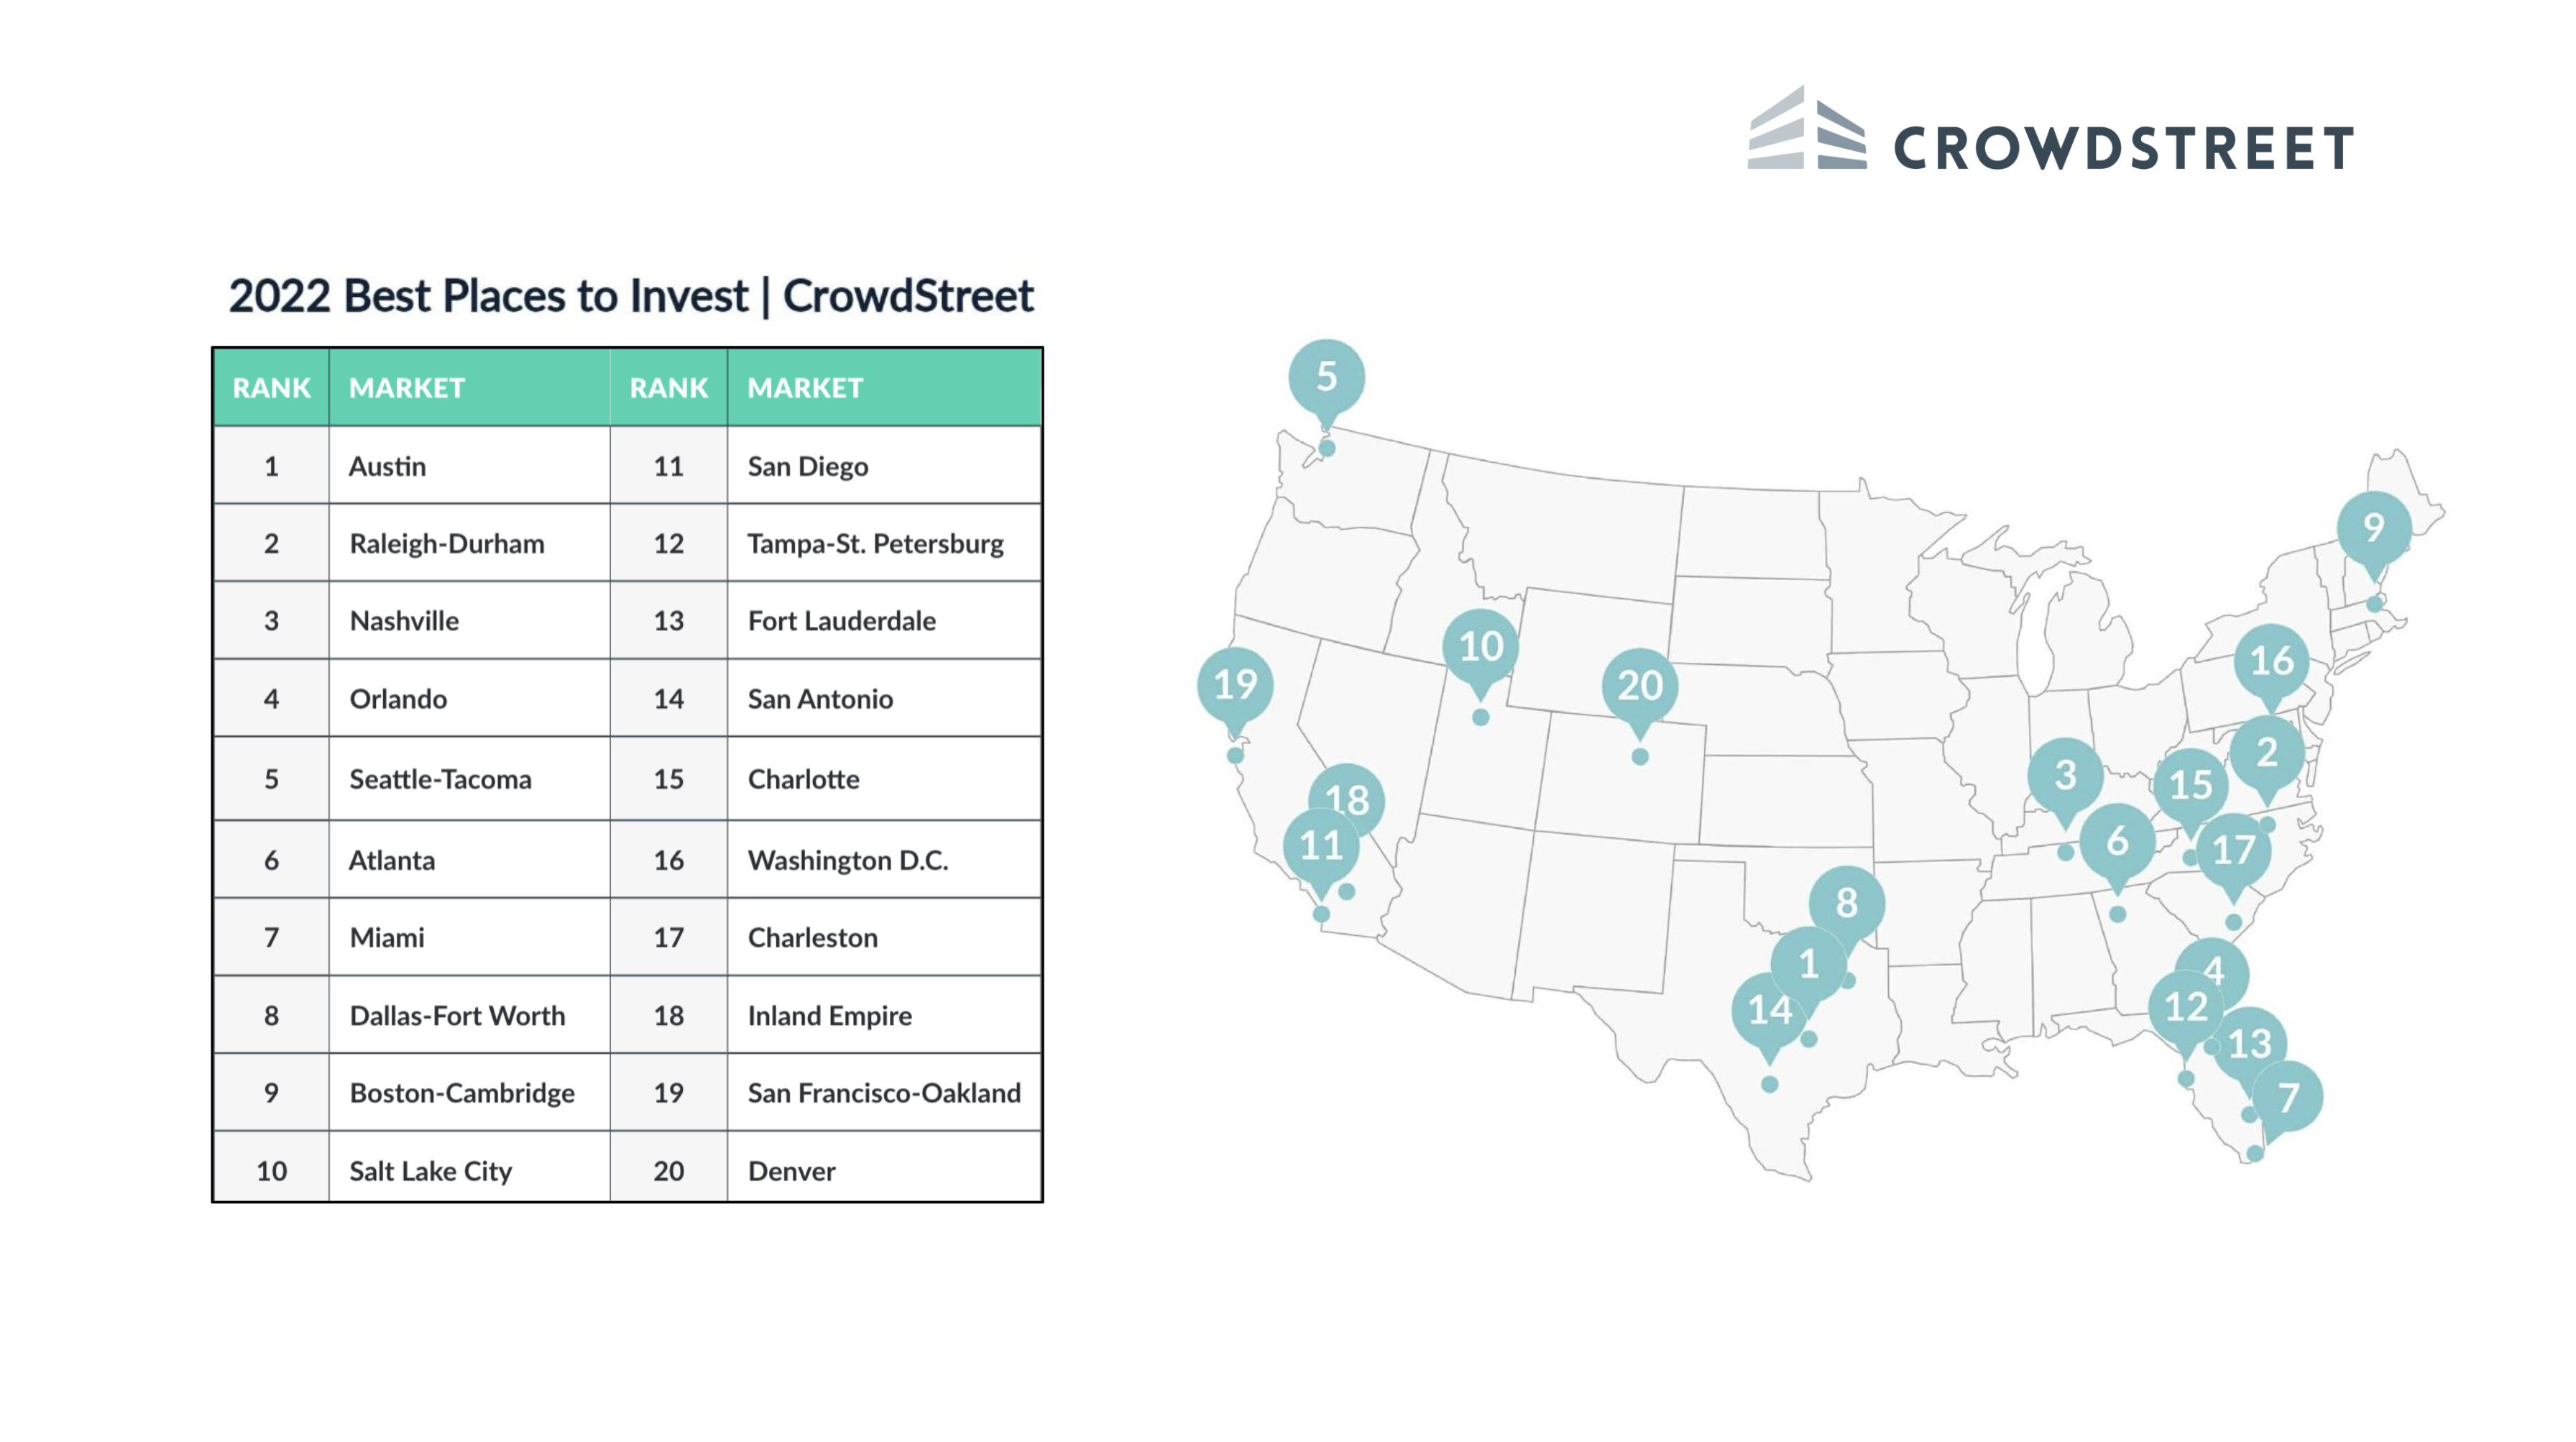 CrowdStreet Identifies Their 20 Best Places to Invest in Private Equity